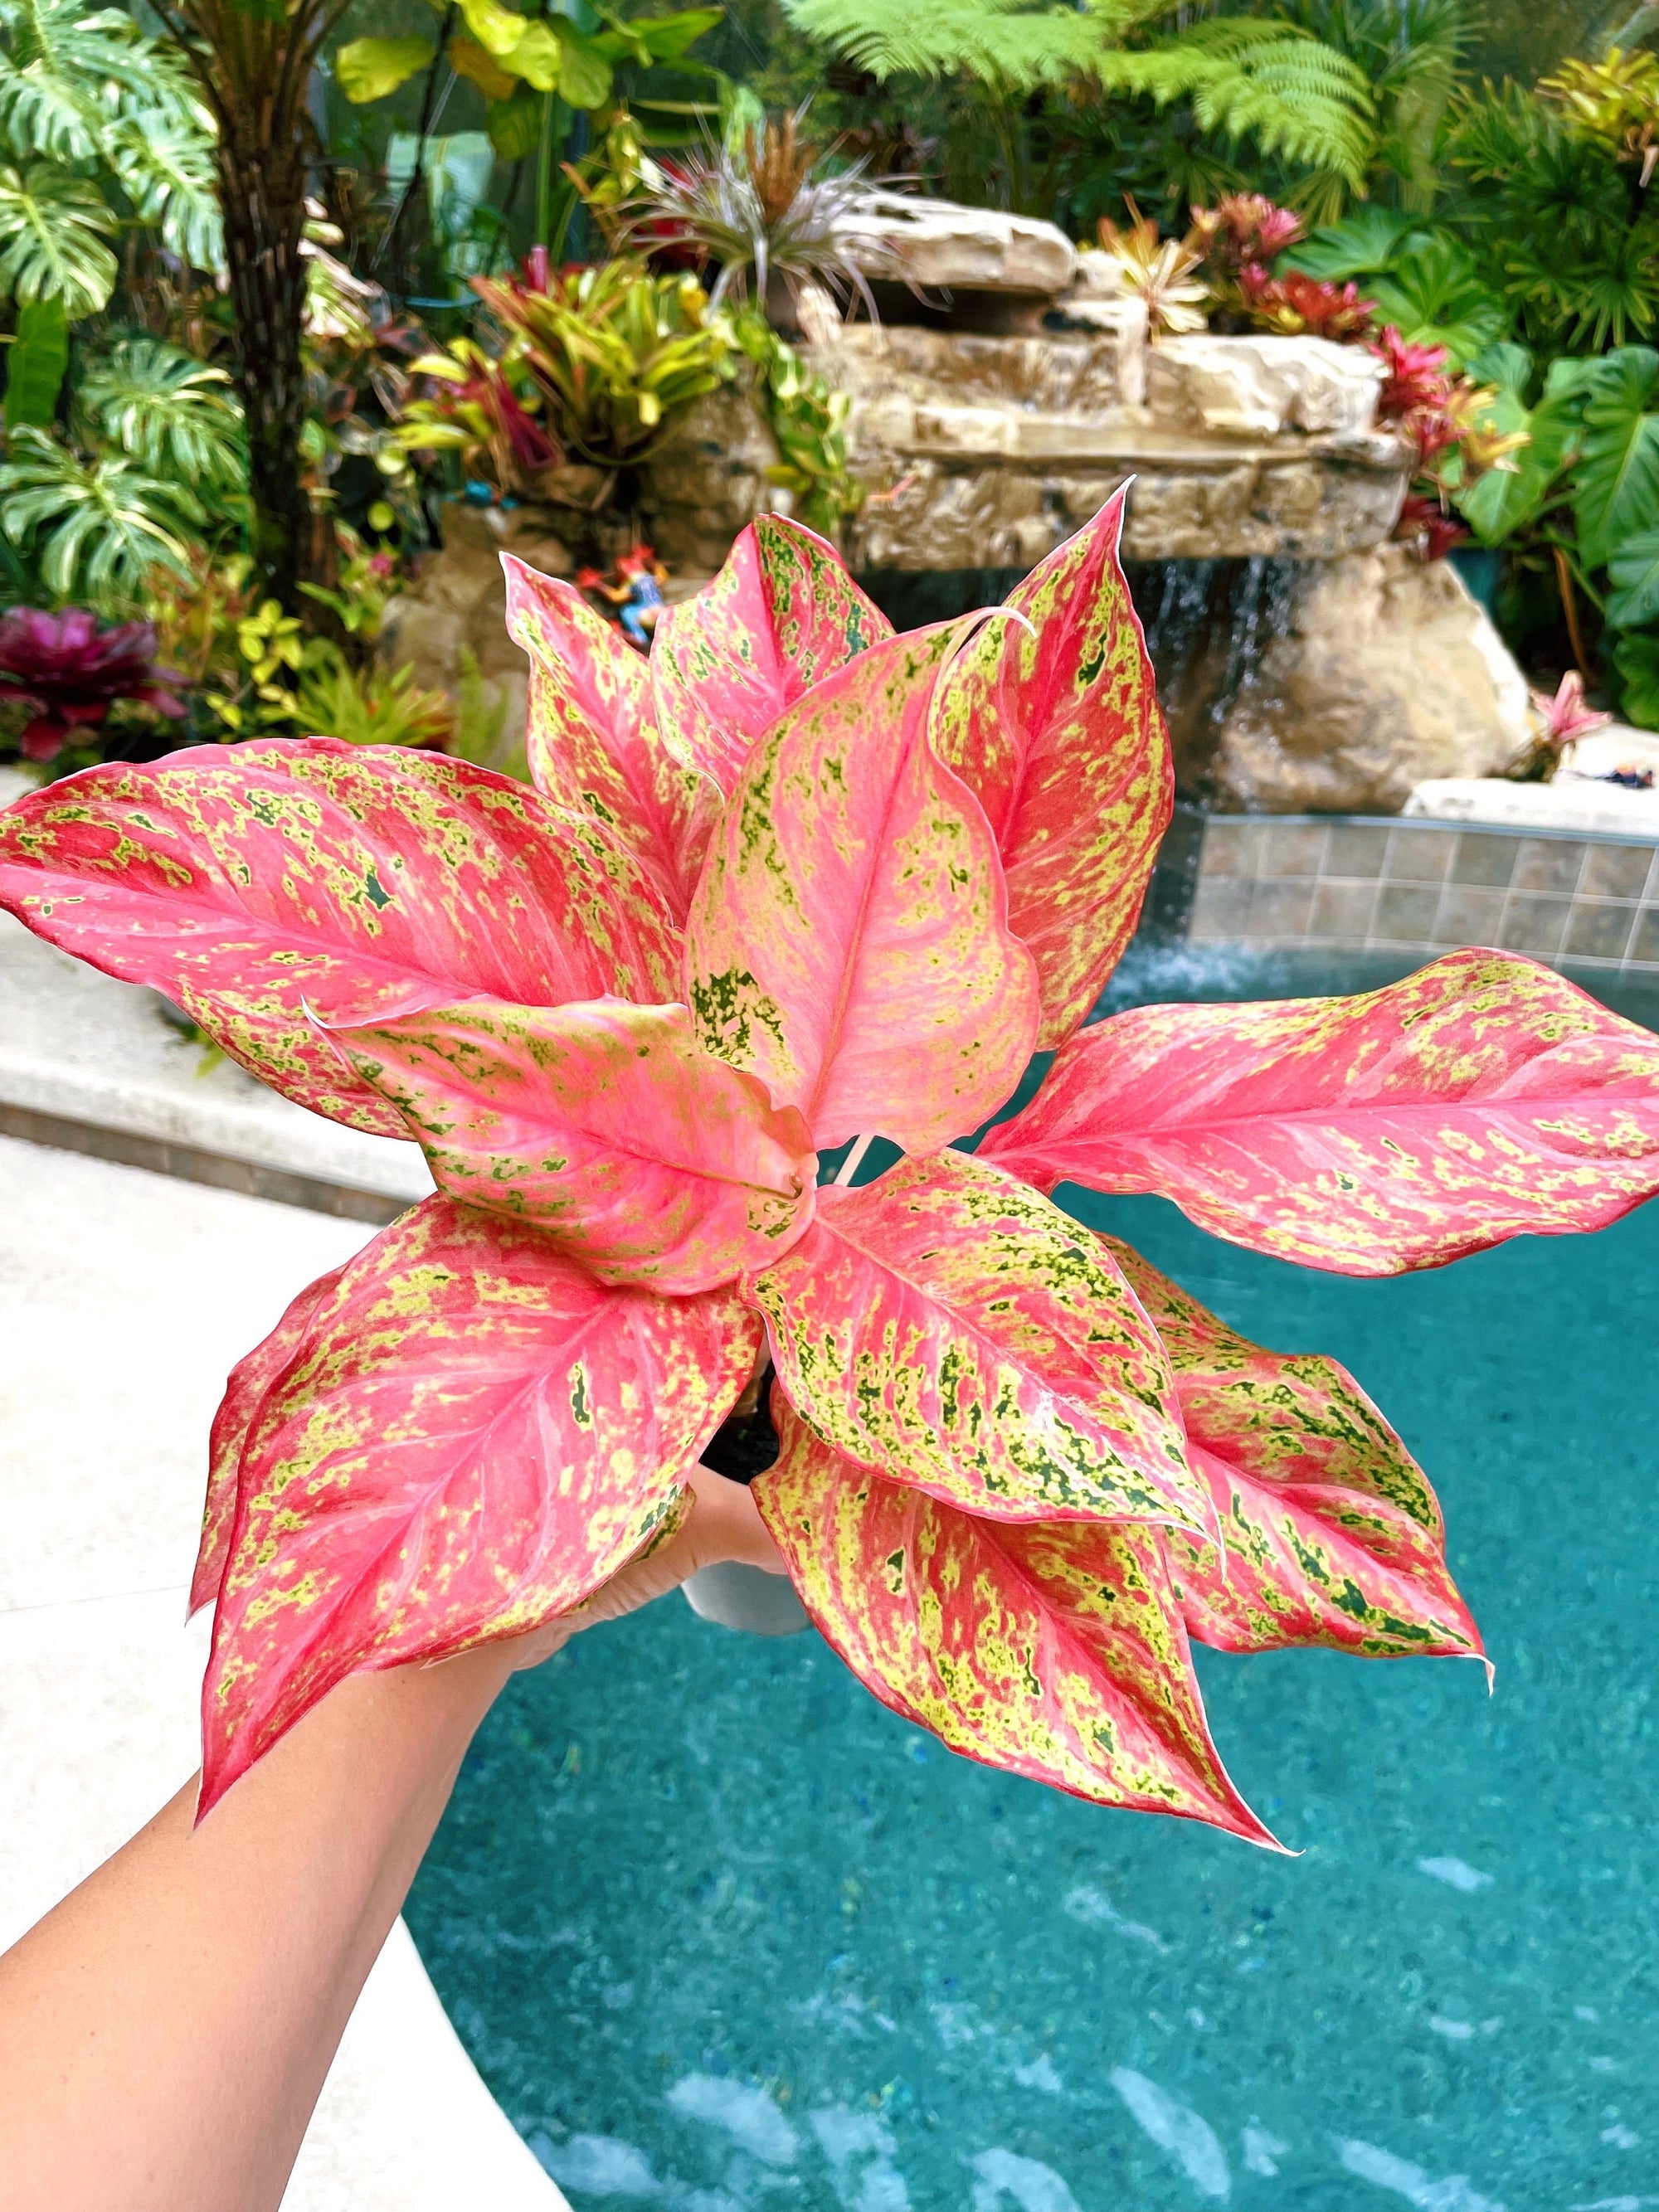 Rare Variegated Aglaonema Pink Butterfly Live House Plant Potted 4 gift US Seller aroid